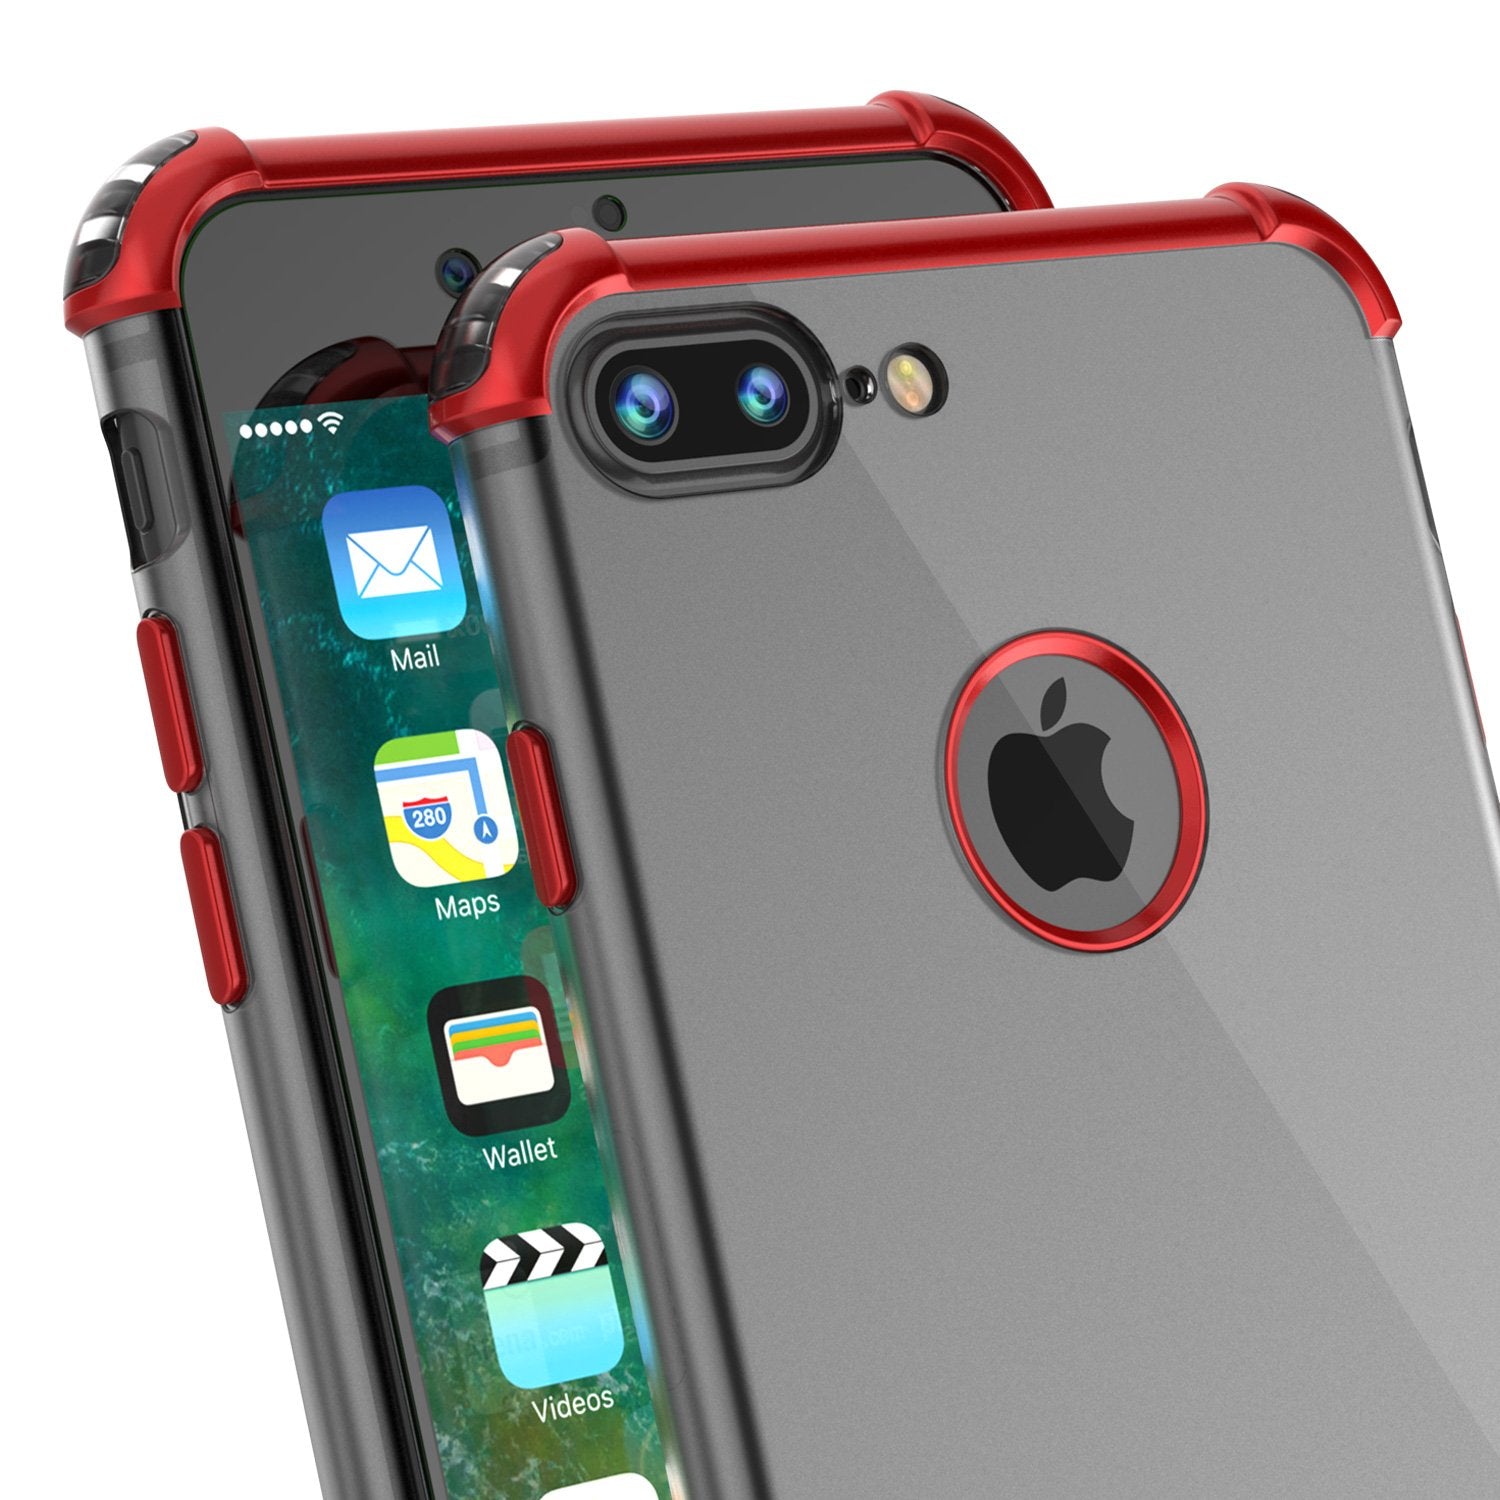 iPhone 7 PLUS Case, Punkcase BLAZE SERIES Protective Cover [Red]